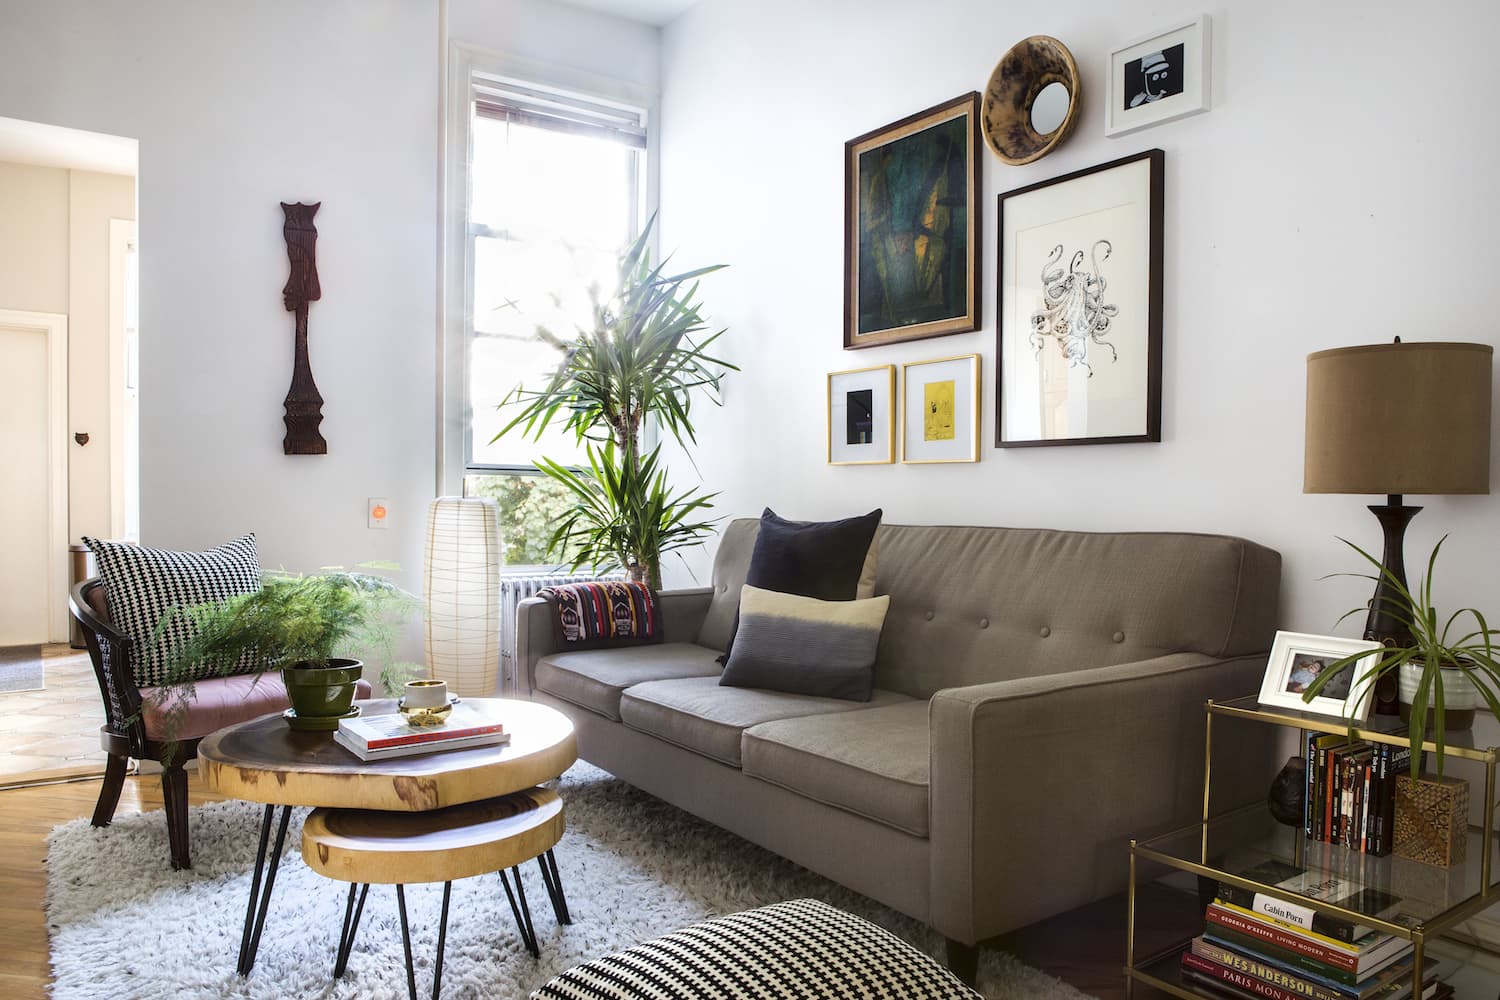 Design Lovers Mix Their Style & Stuff in Brooklyn | Apartment Therapy